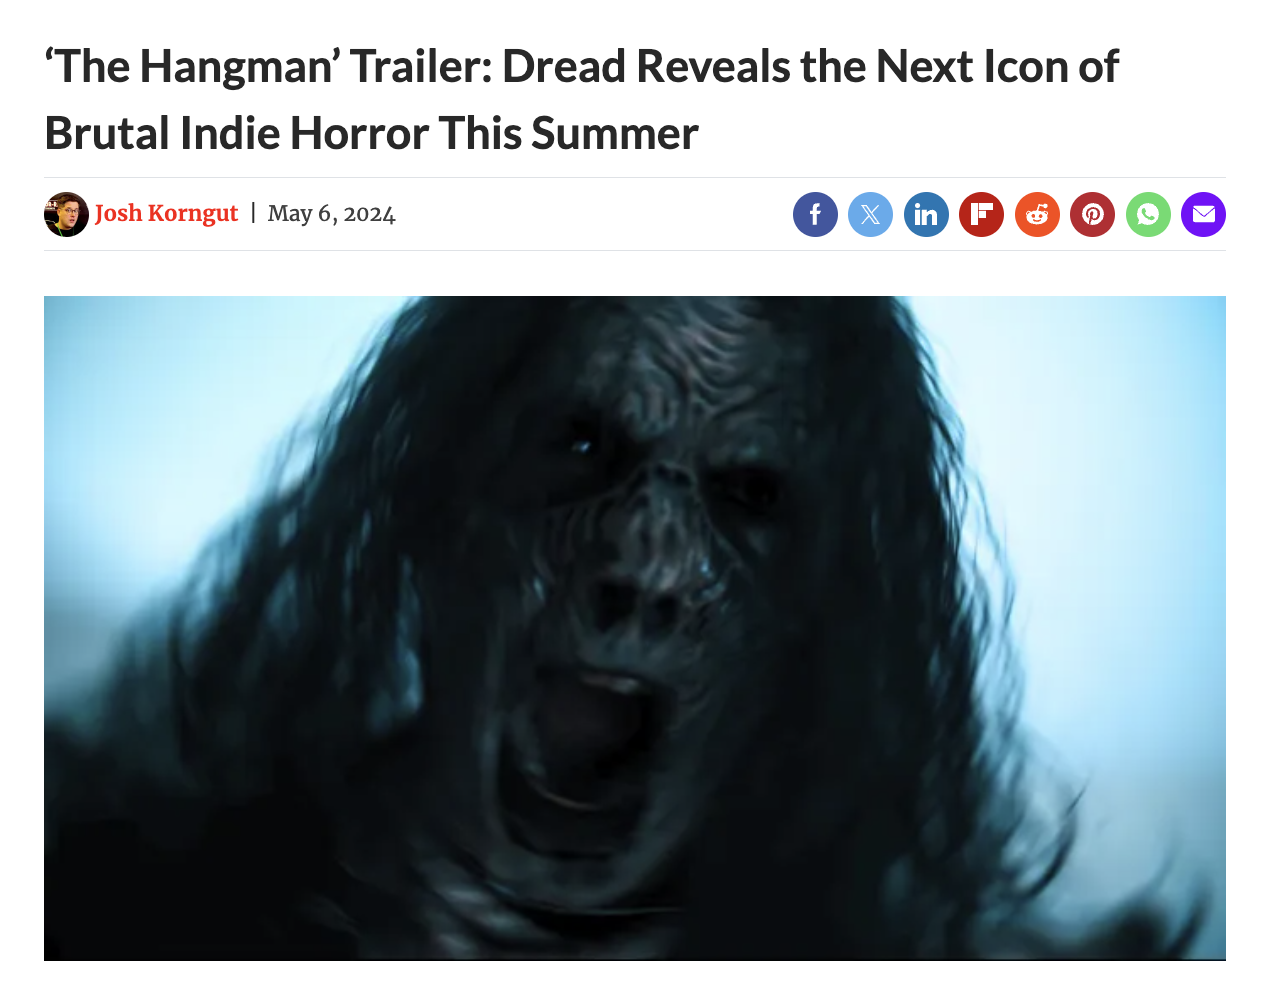 ‘The Hangman’ Trailer: Dread Reveals the Next Icon of Brutal Indie Horror This Summer